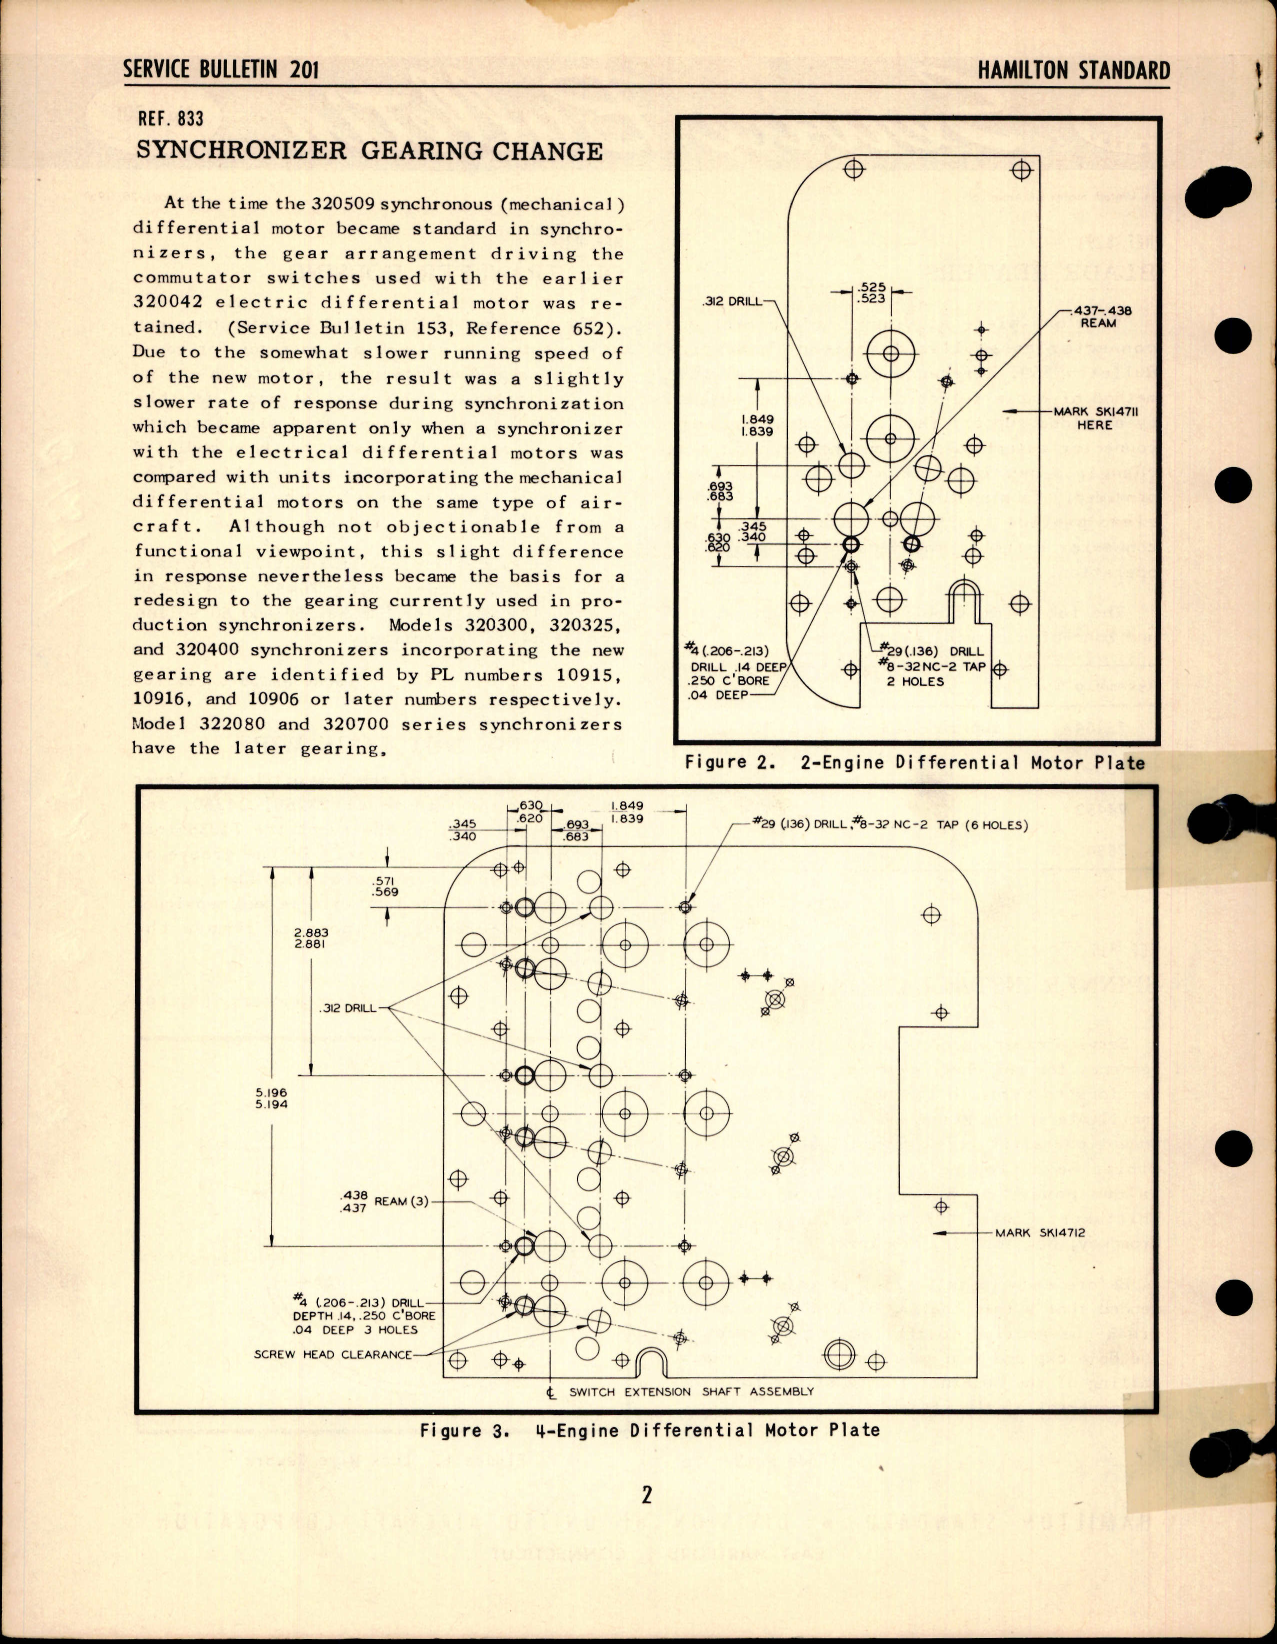 Sample page 2 from AirCorps Library document: Blade Heaters, Ref 829